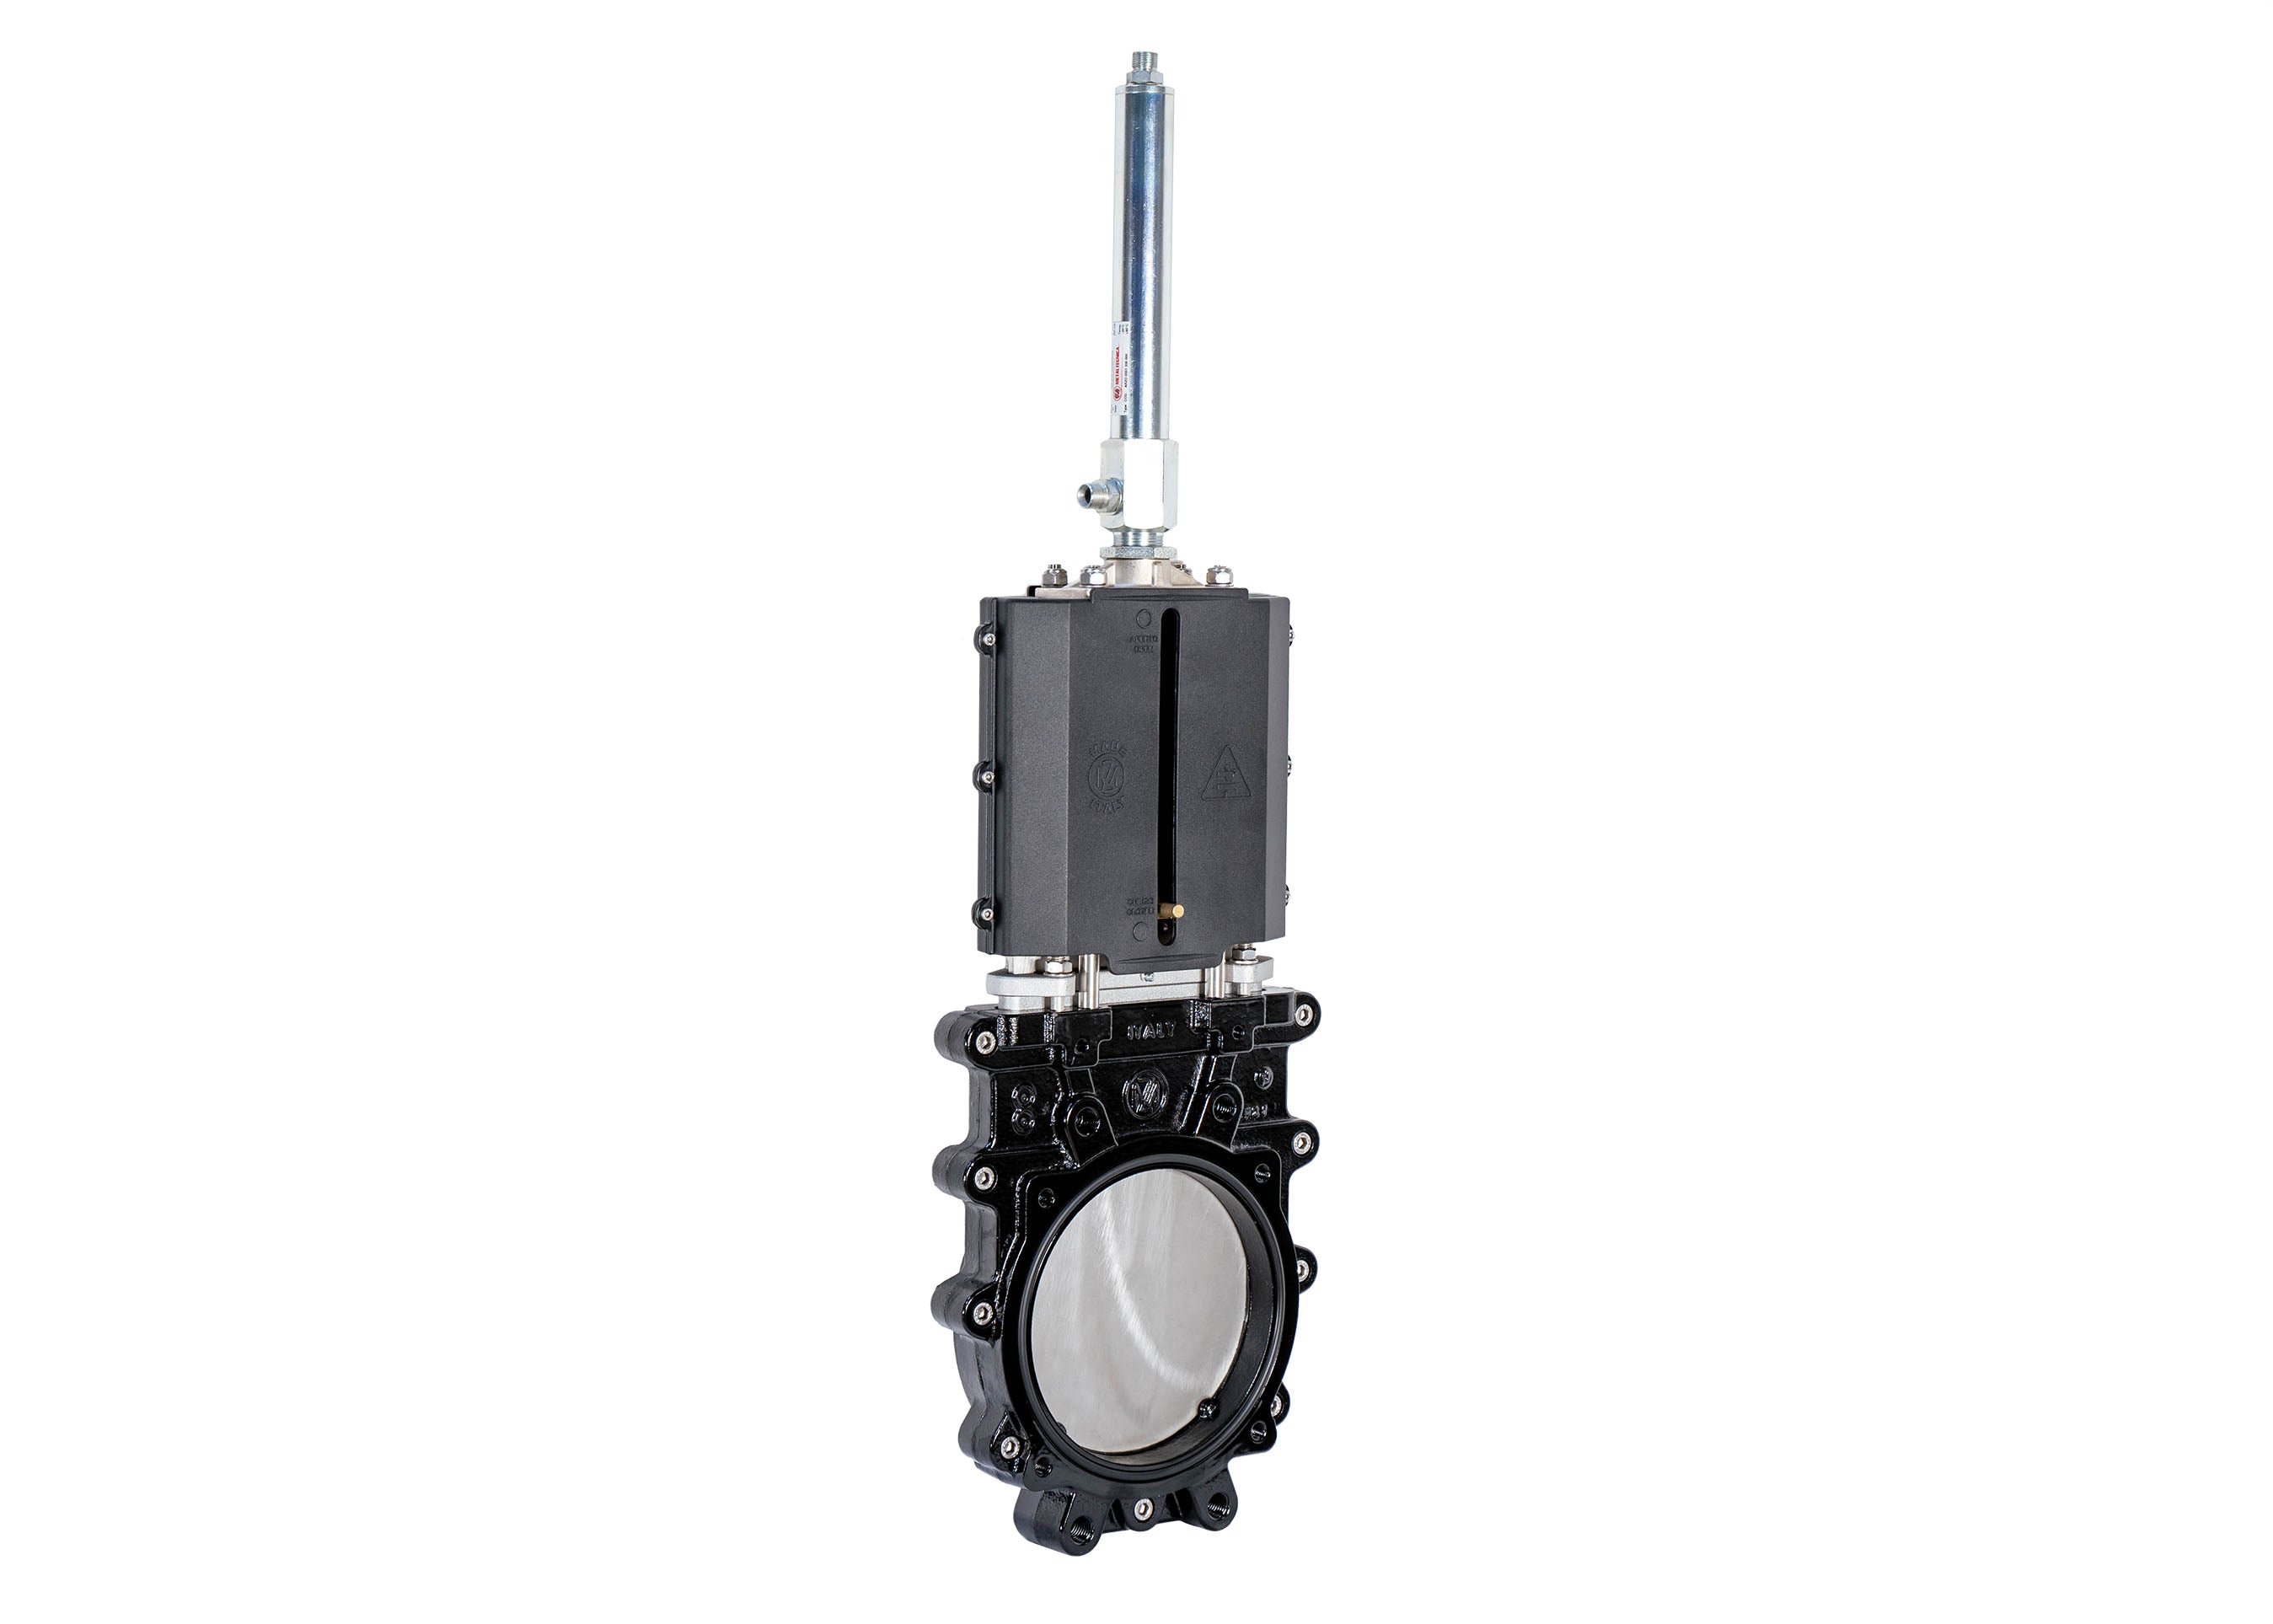 Metaltecnica Zanolo MZ Cast Iron Gate Valve with Bidirectional Stainless Steel Knife